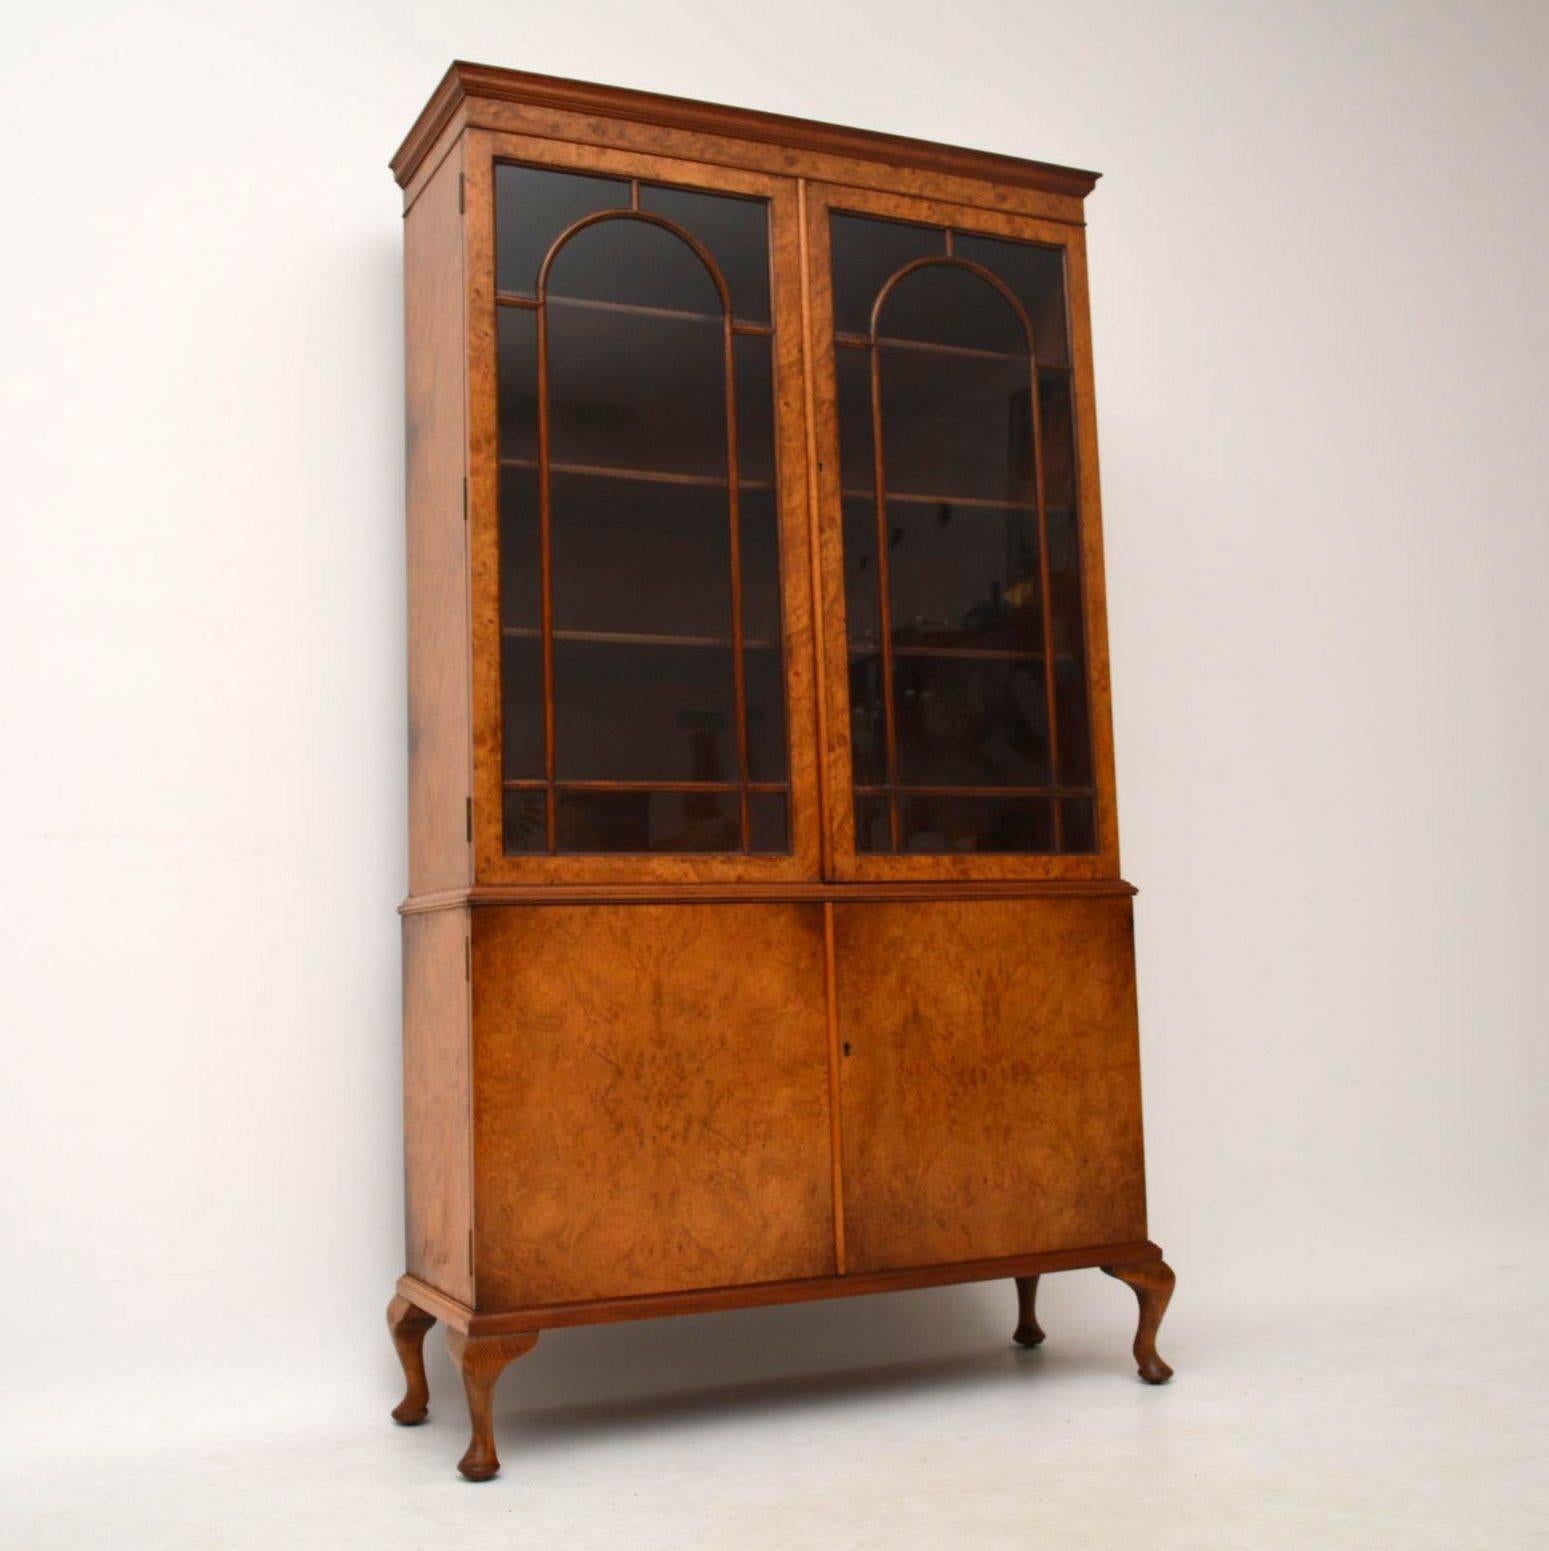 This large antique burr walnut bookcase has a lovely warm color and good figuring on the wood. The top section has astral-glazed doors and inside are four adjustable shelves. The bottom section has burr walnut cupboards with one shelf inside. This